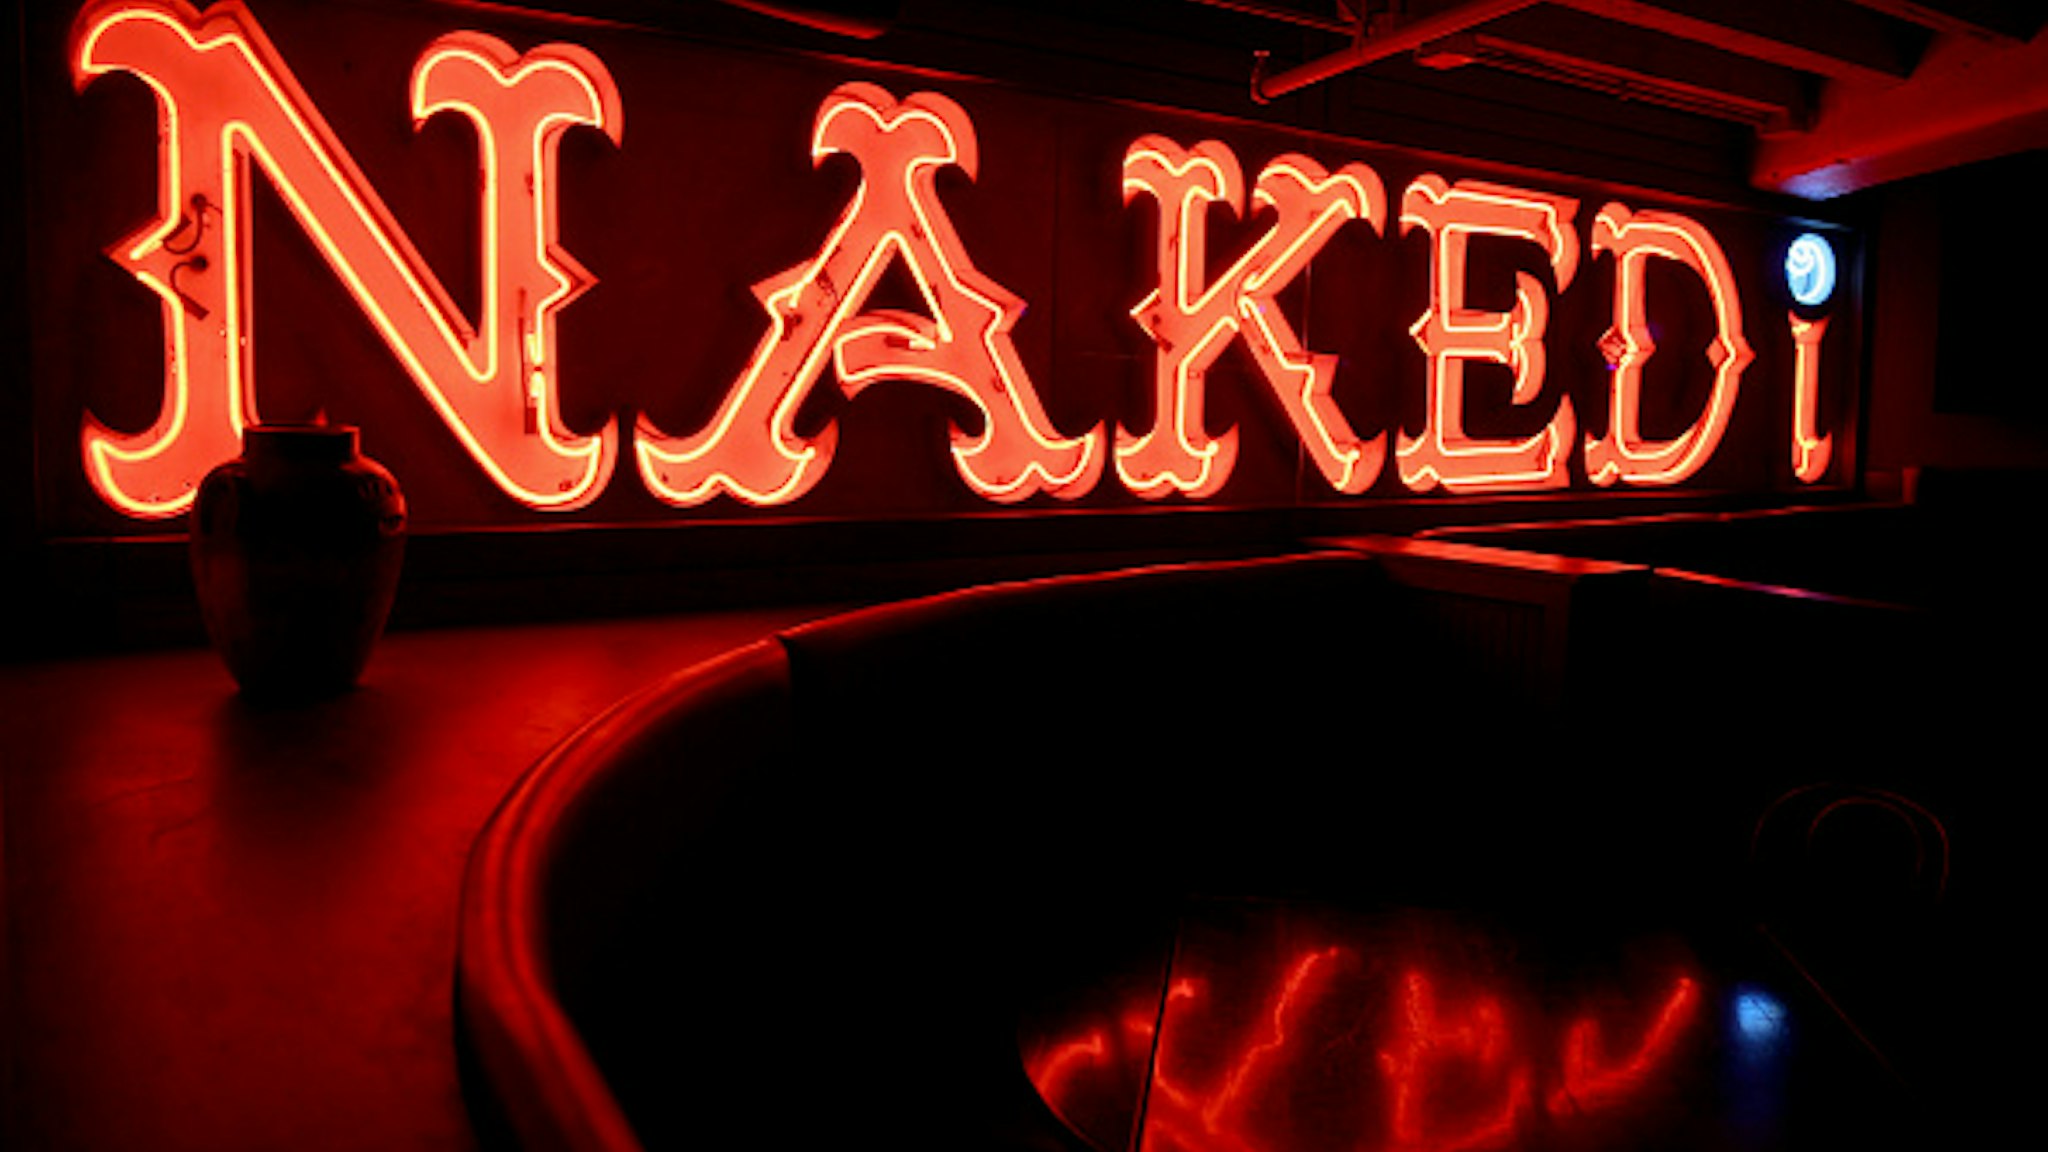 BOSTON - JULY 21: The former Naked i strip club sign hangs in the lower level of West End Johnnie's in Boston. The Naked i was one of many venues in the former "Combat Zone" adult entertainment district.